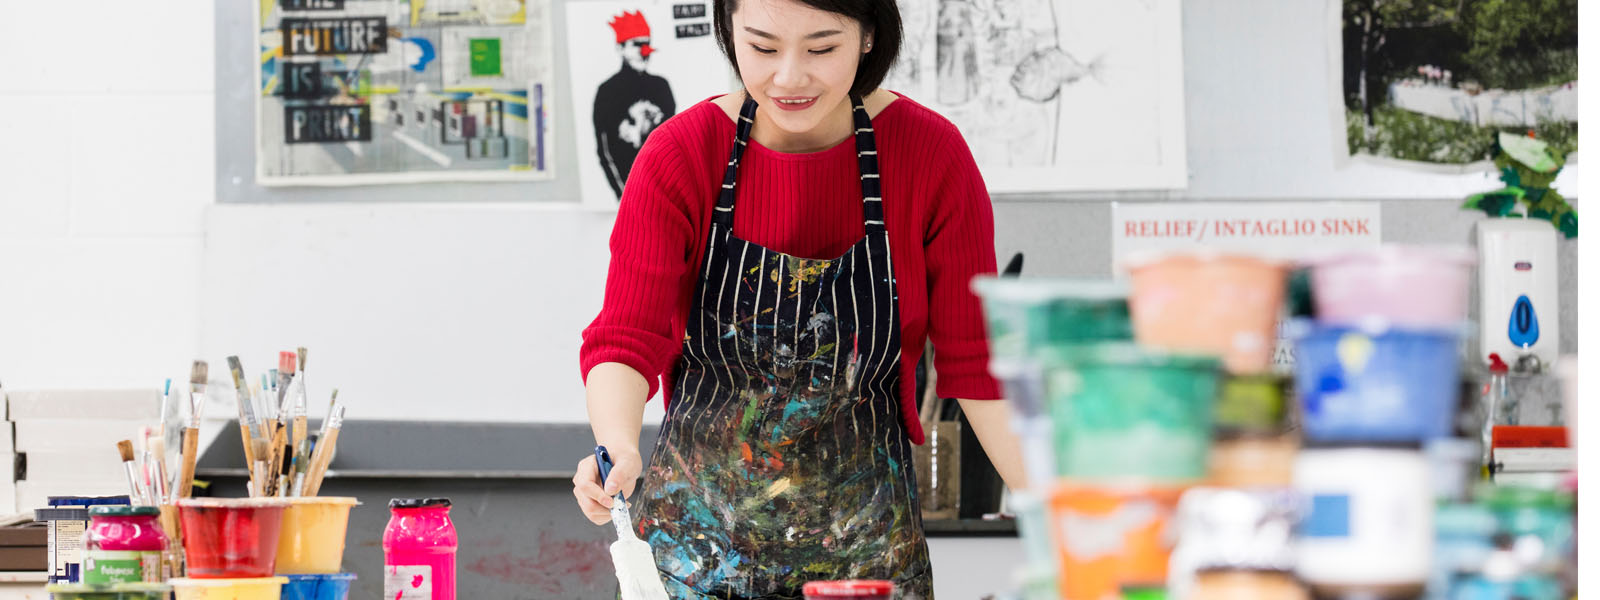 Female student painting in the studio with colourful paint bottles surrounding her